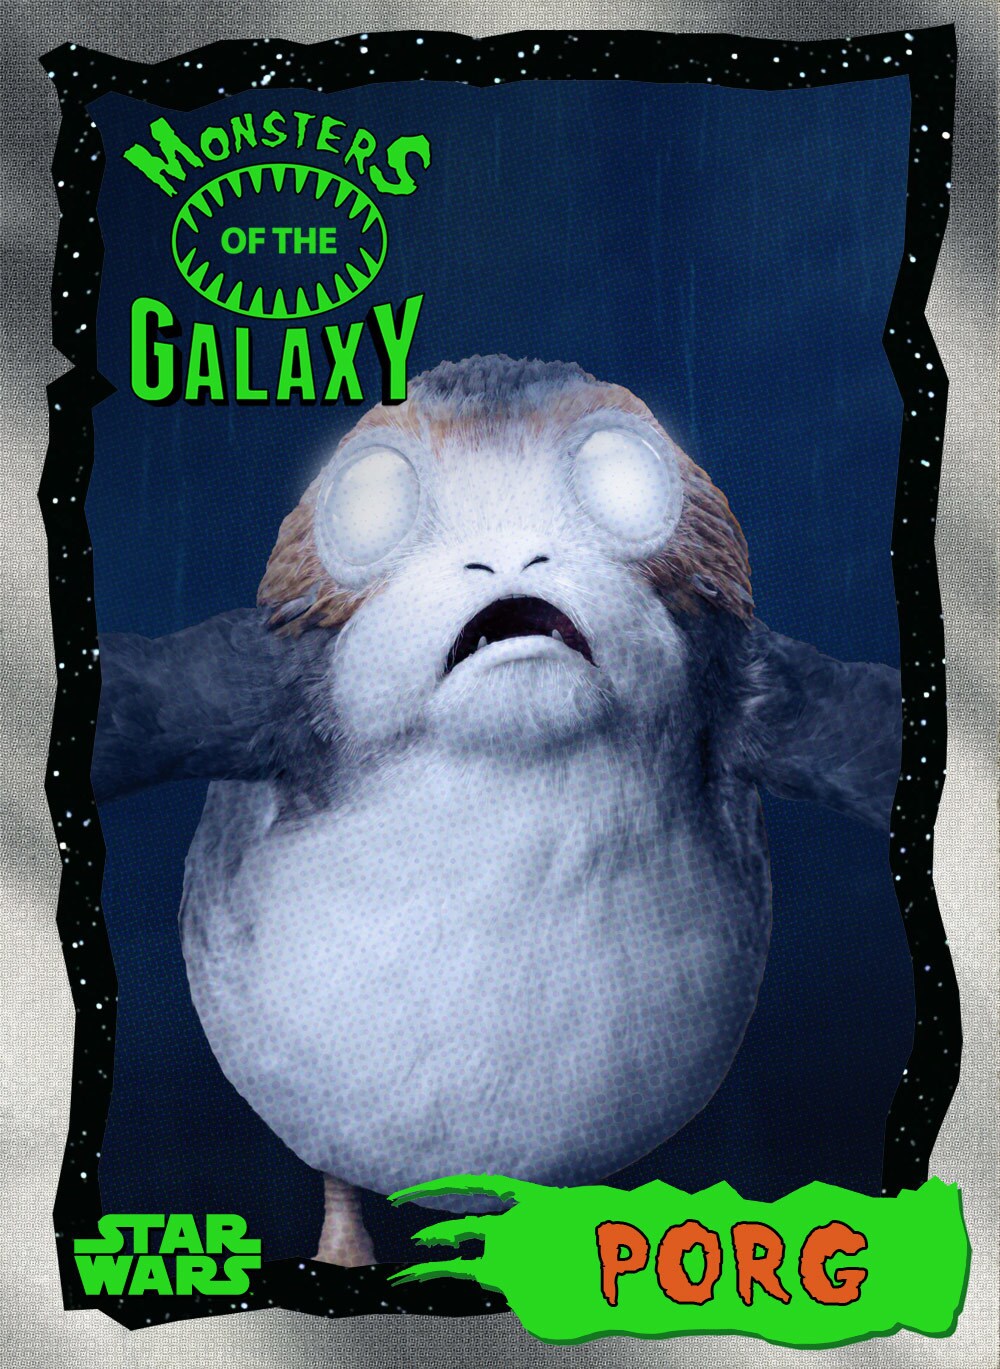 A white-eyed porg, featured on a Monsters of the Galaxy trading card.